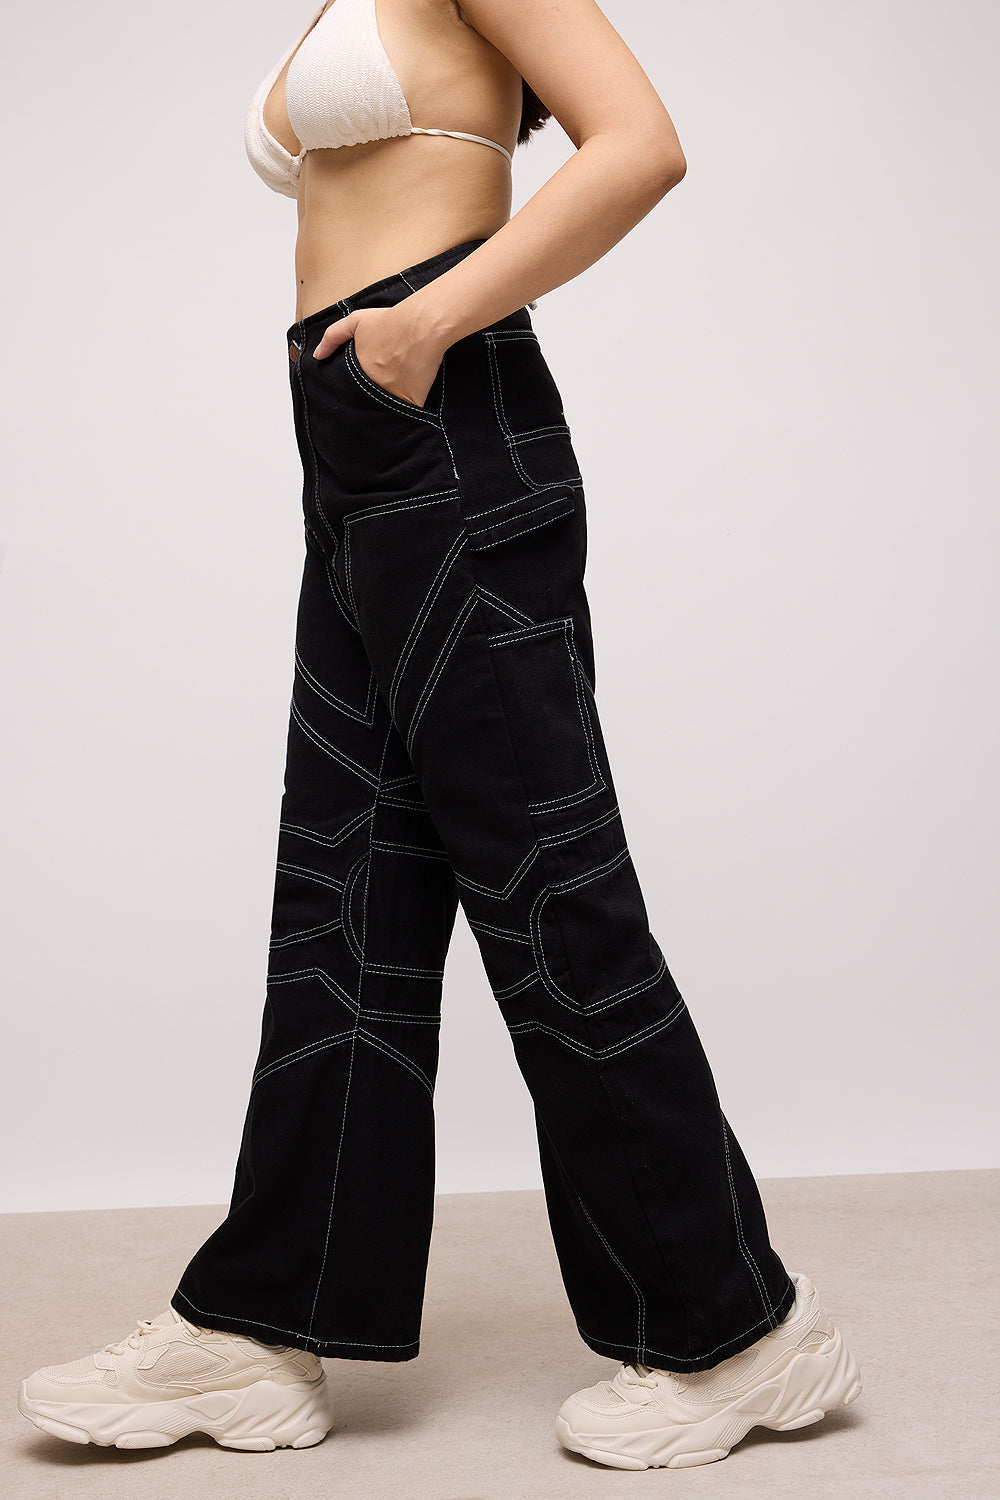 ABSTRACT BLACK WIDE PANTS